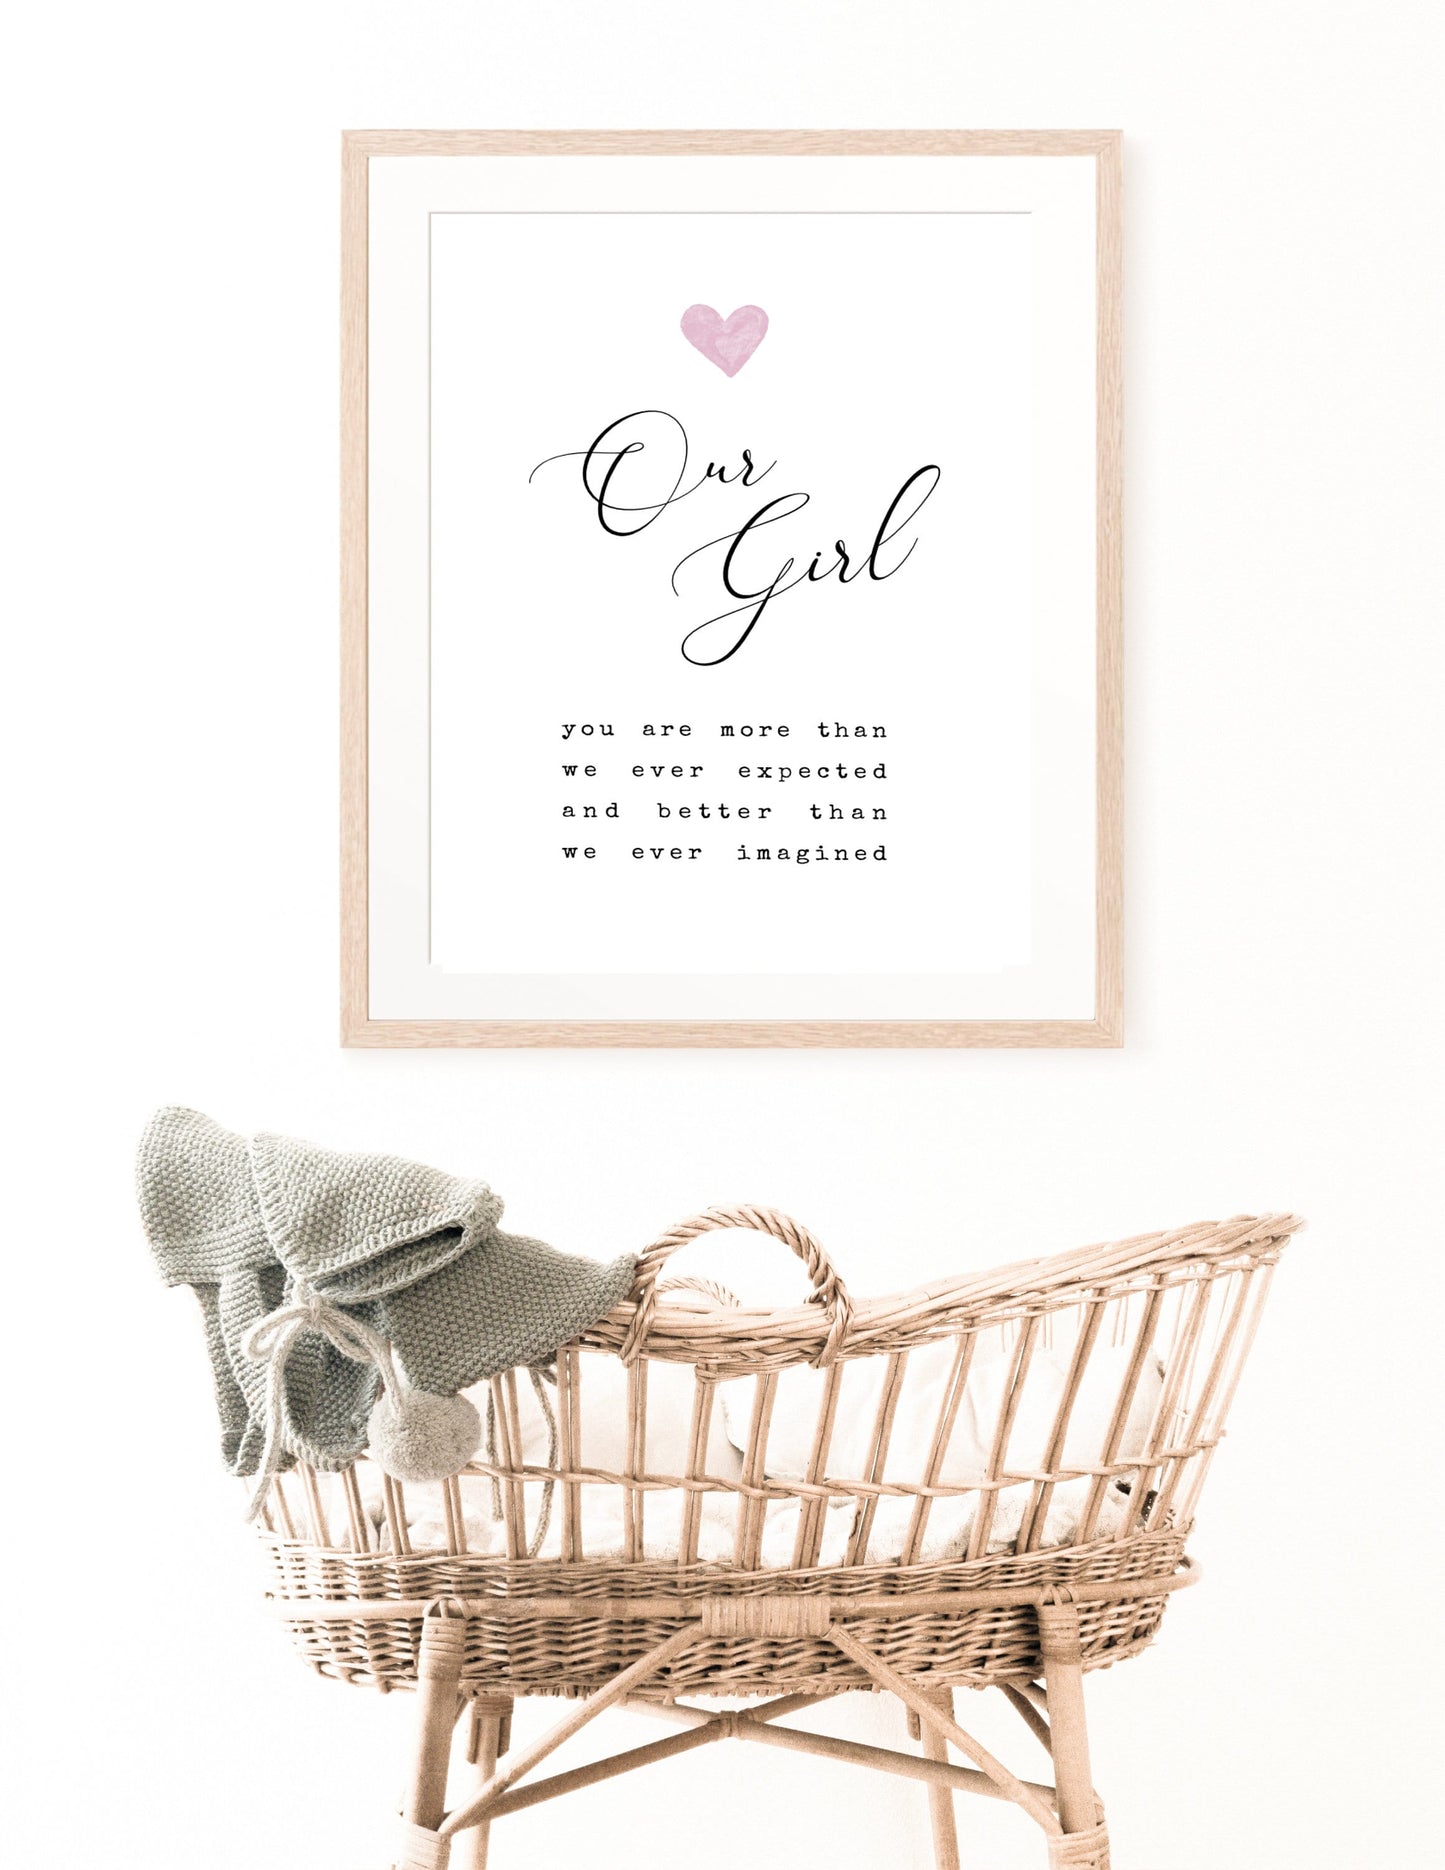 A digital print is hung above a baby’s cradle. The digital print has a pink heart at the top, and a piece of writing that says: “Our girl, you are more than we ever expected and better than we ever imagined.”